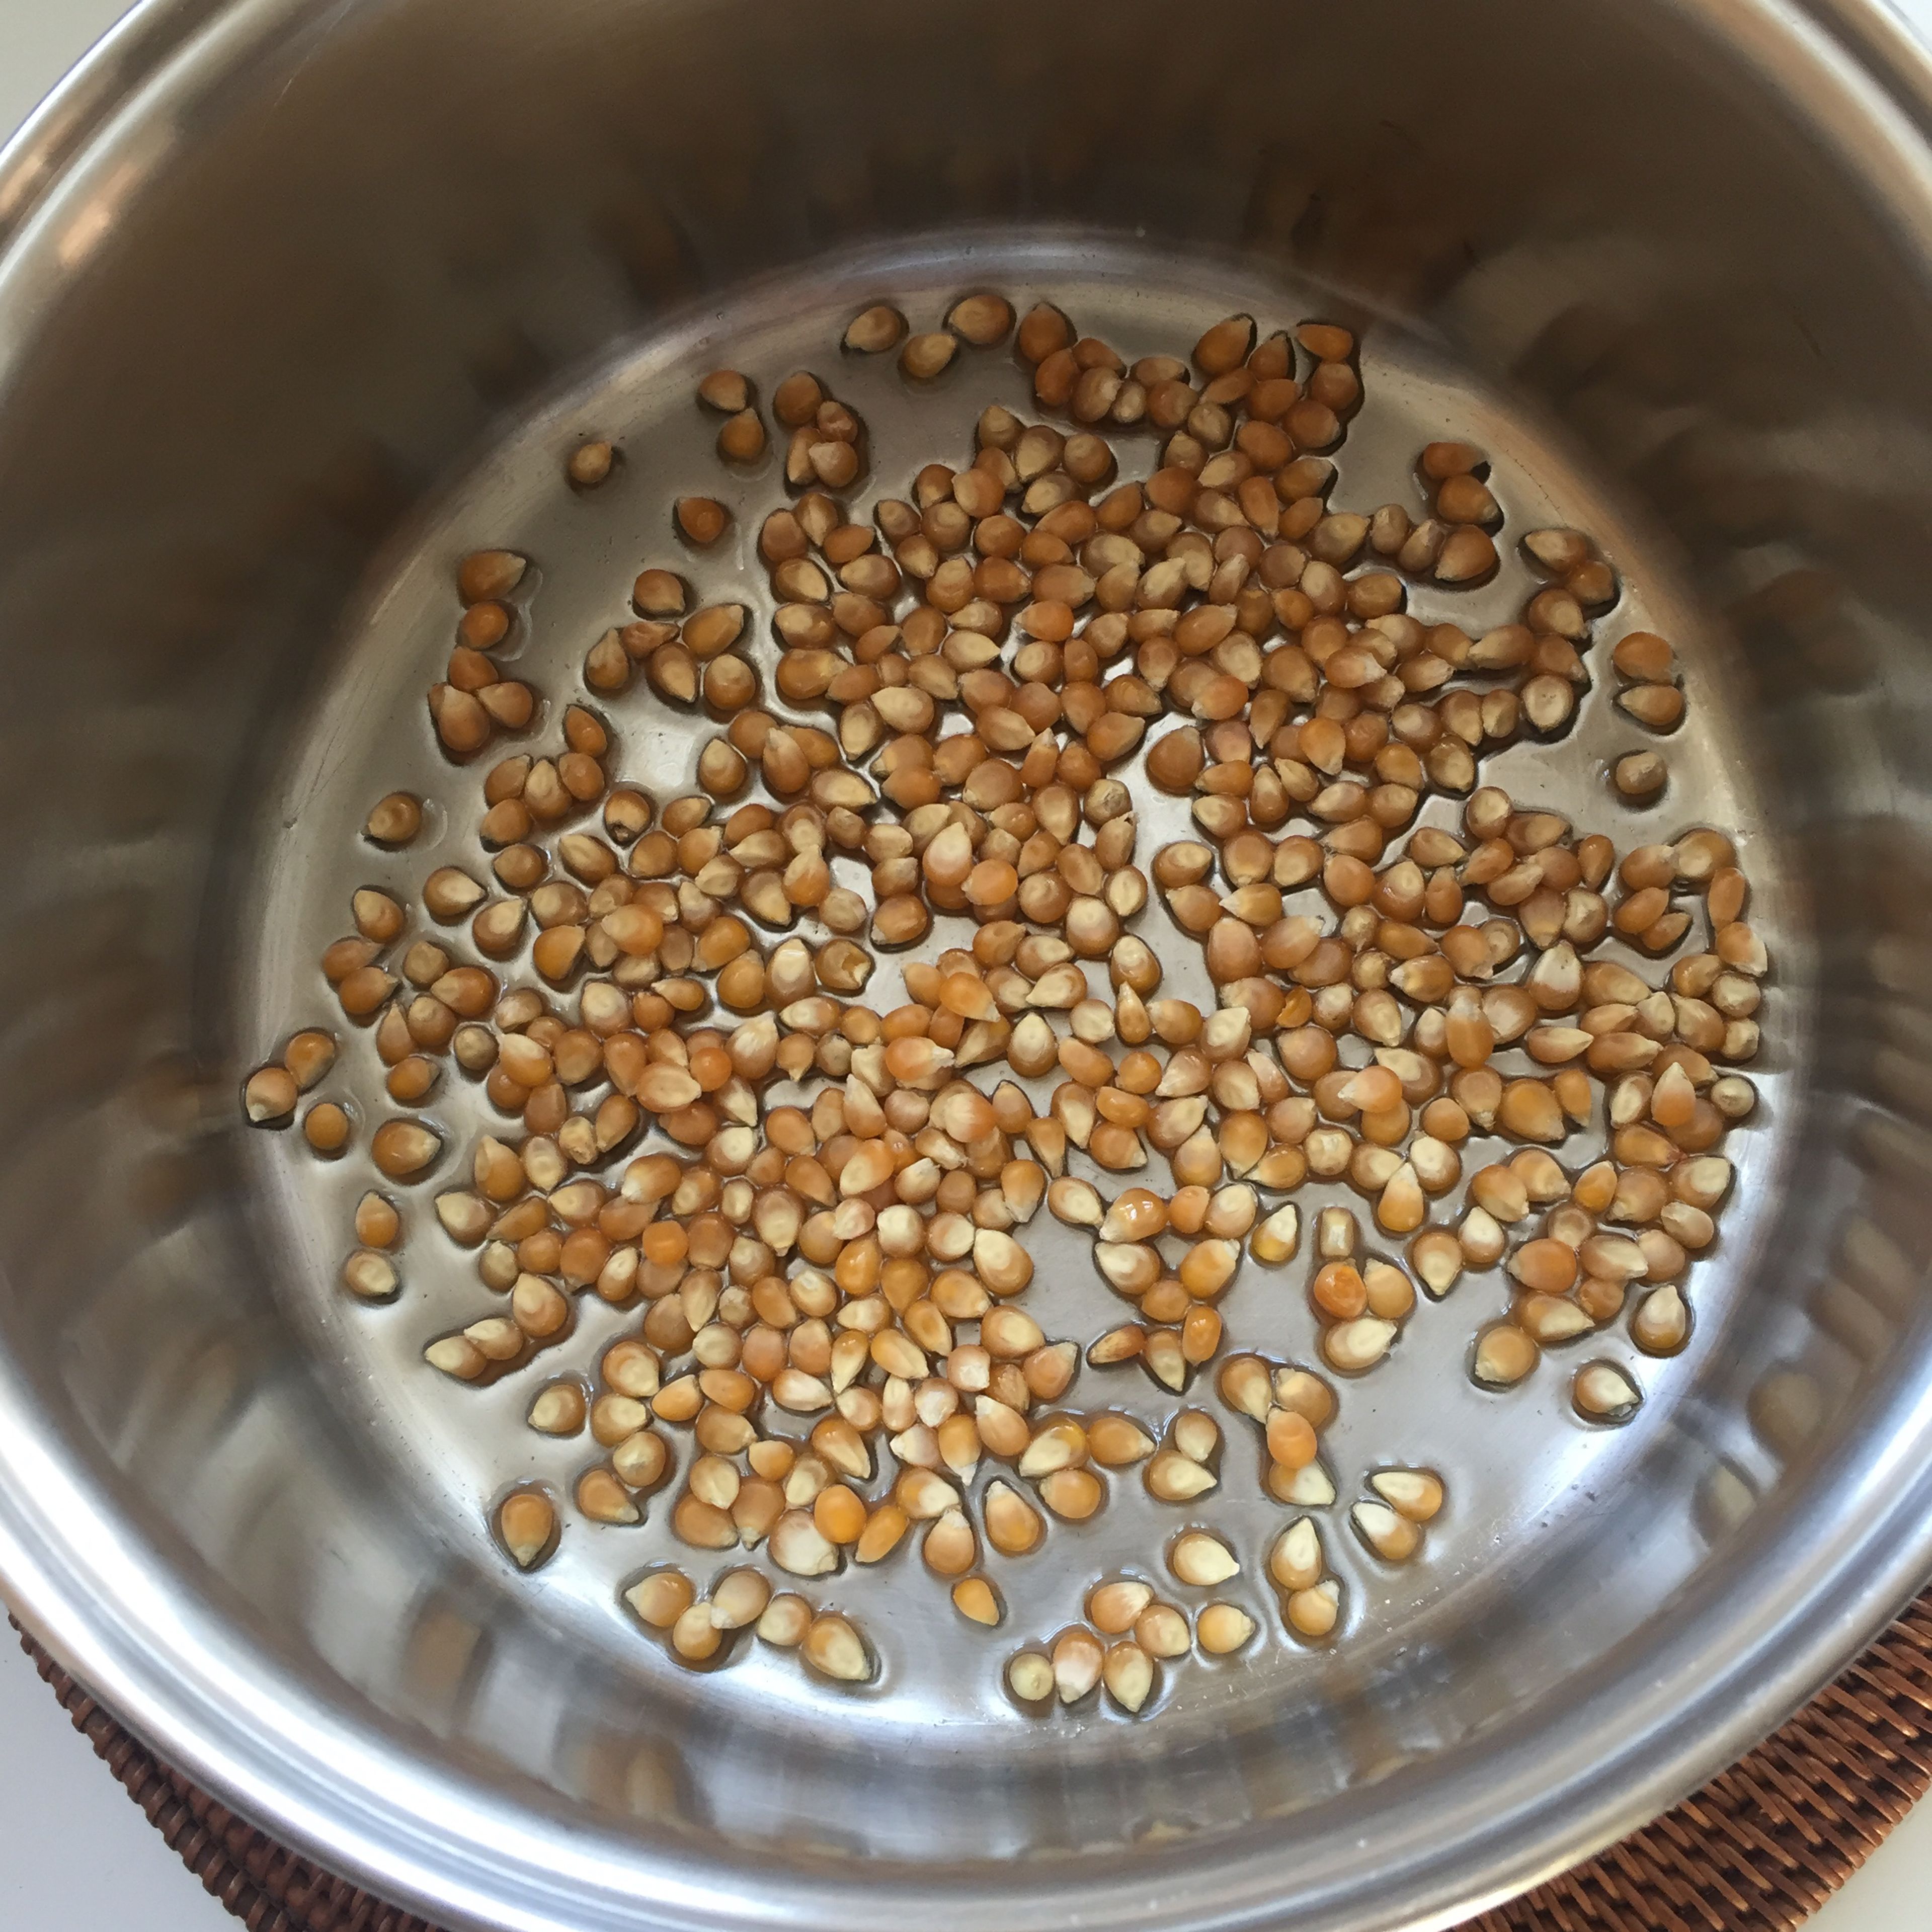 Once spread, cover pot and heat over medium-high heat until all kernels are popped. This should take about 5-8 minutes. Shake the pot occasionally to avoid getting burnt popcorn